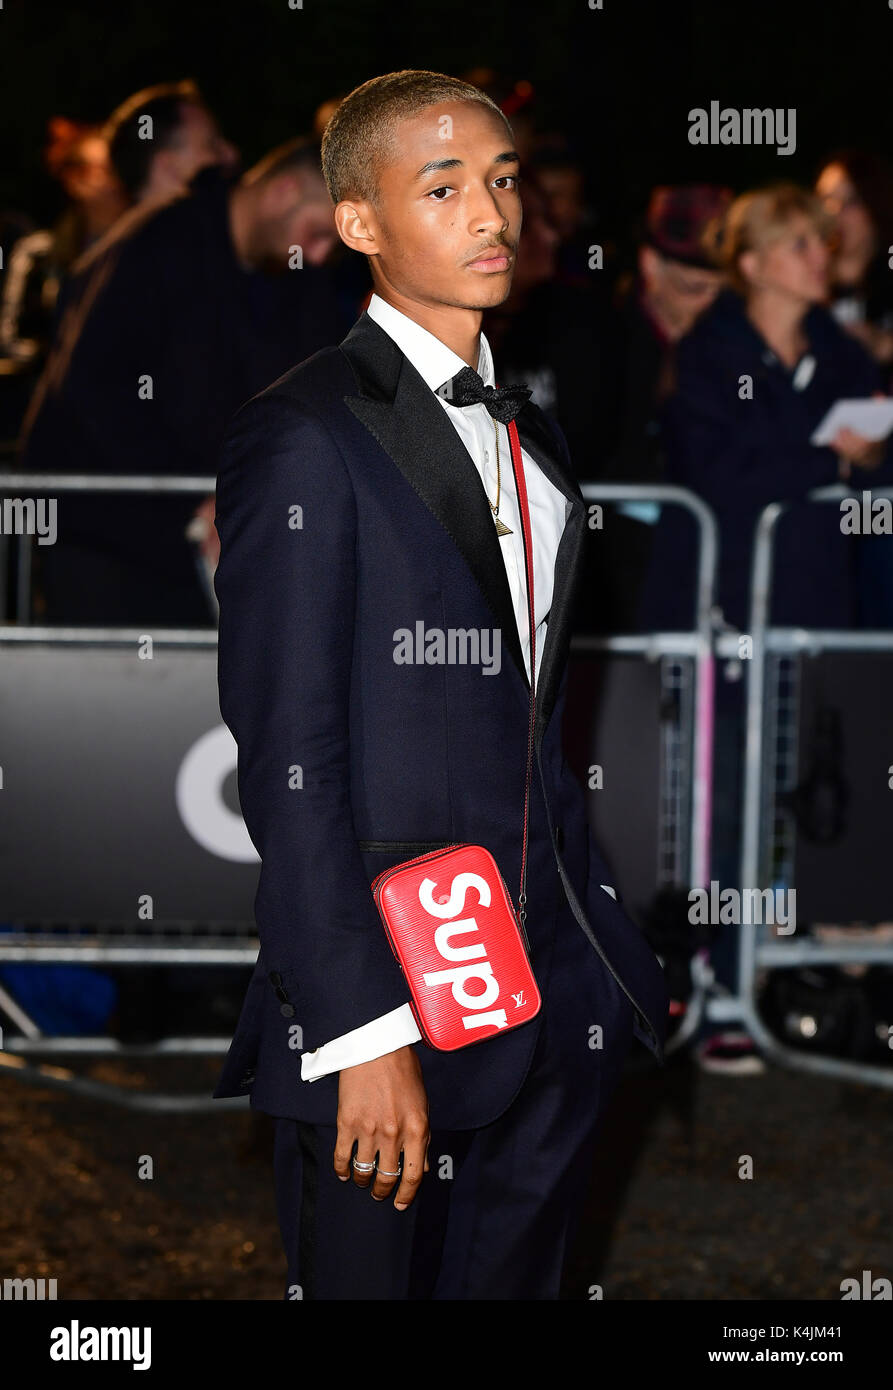 Bag red, Supreme x Louis Vuitton of Jaden Smith in his clip ICON